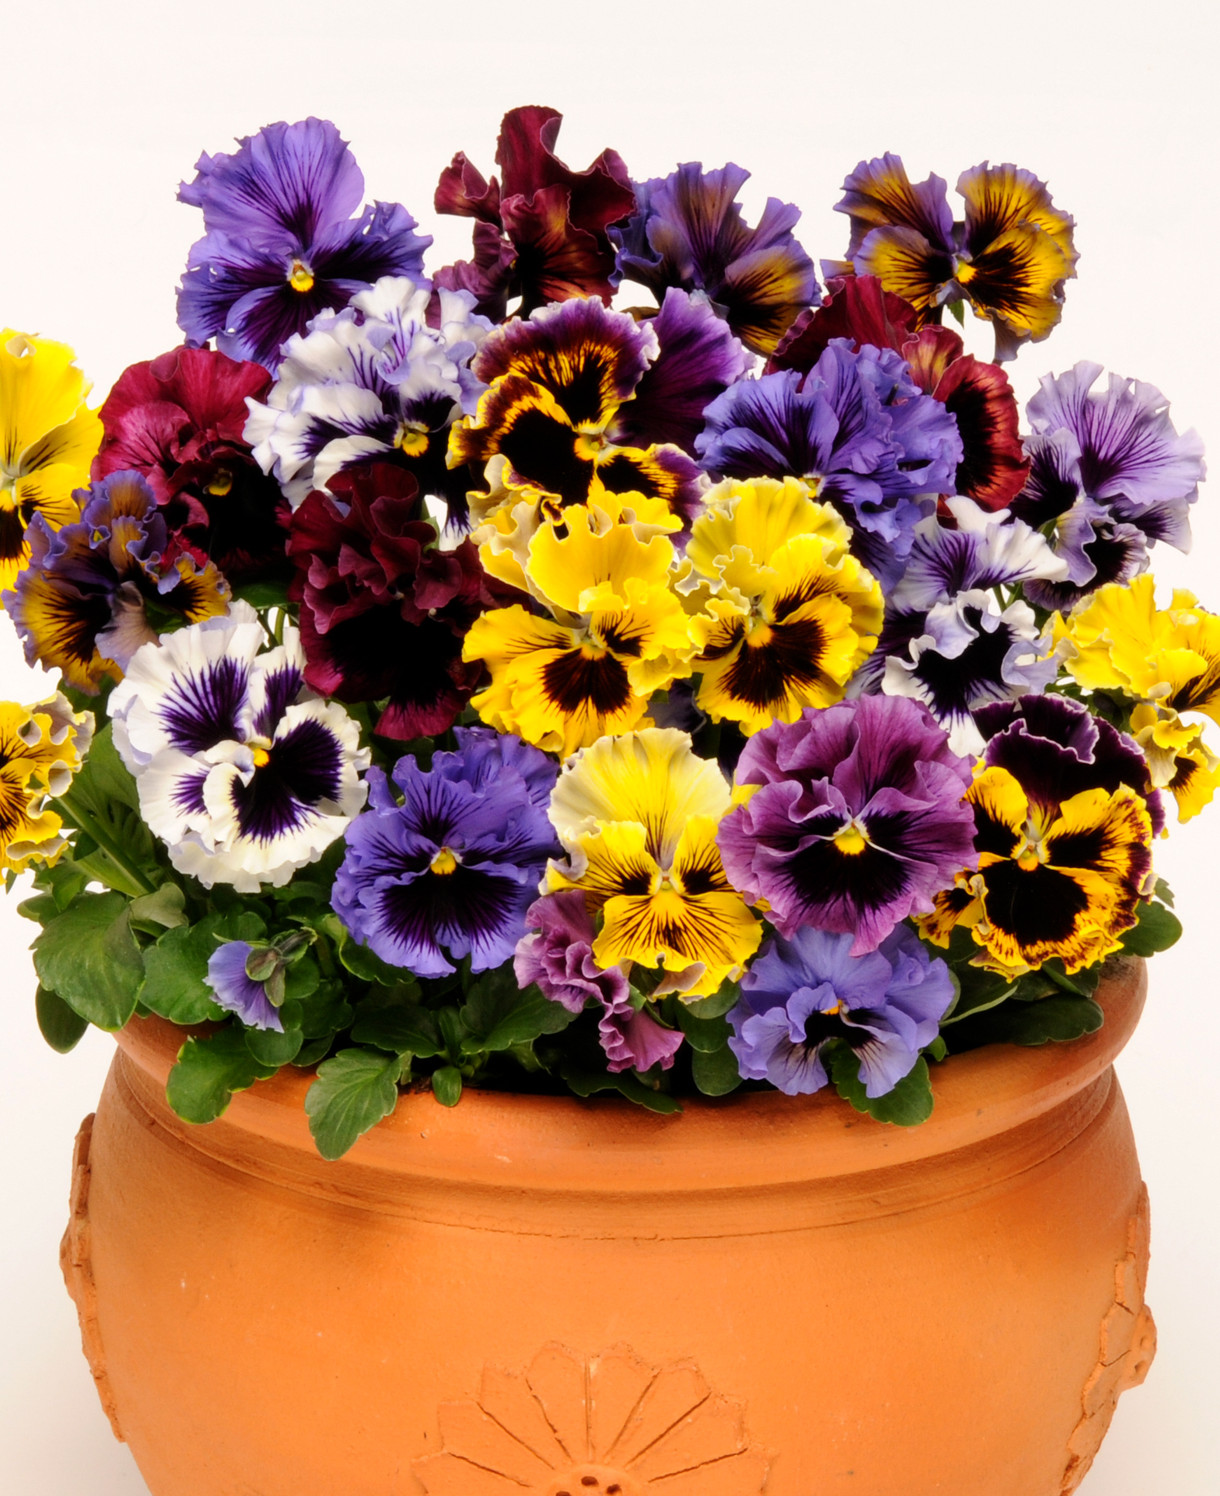 Pansy 'Frizzle Sizzle' Mix